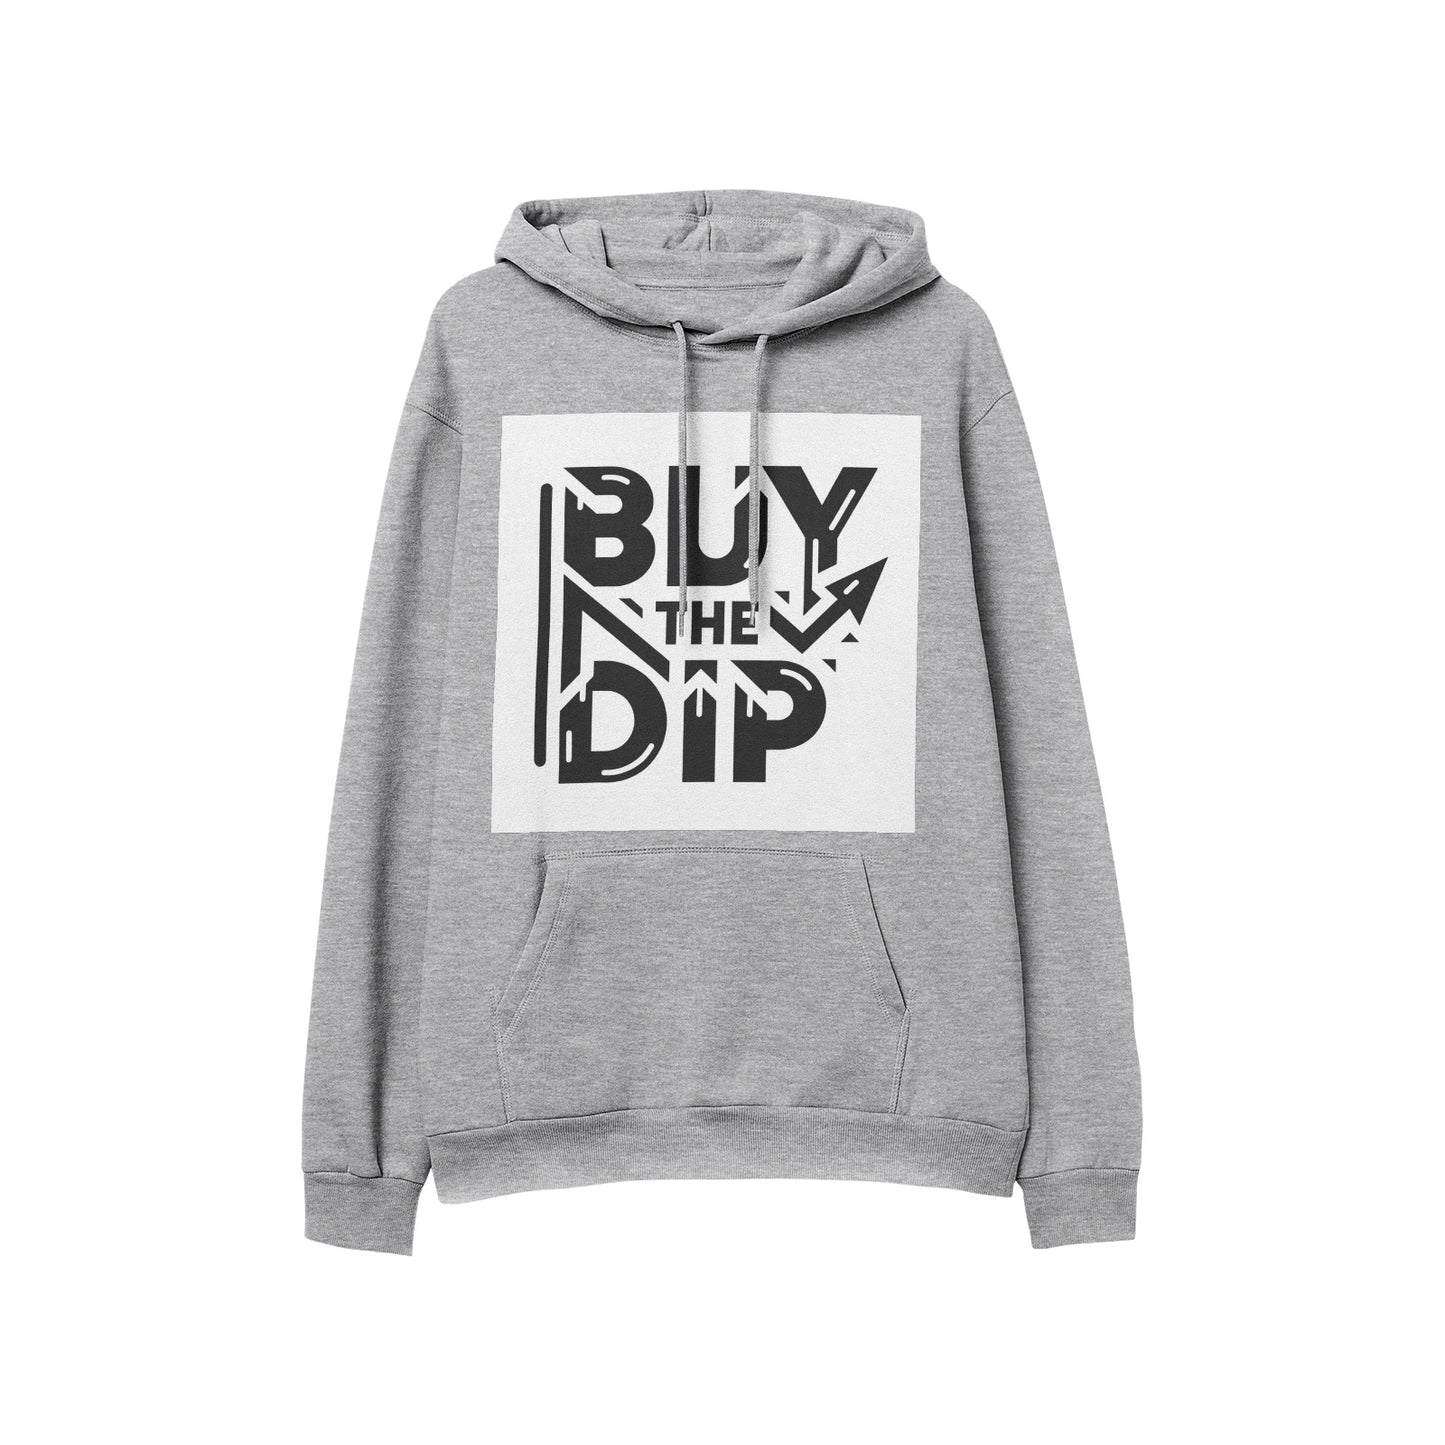 Men's Soft Cotton Hoodie with Buy The Dip Design